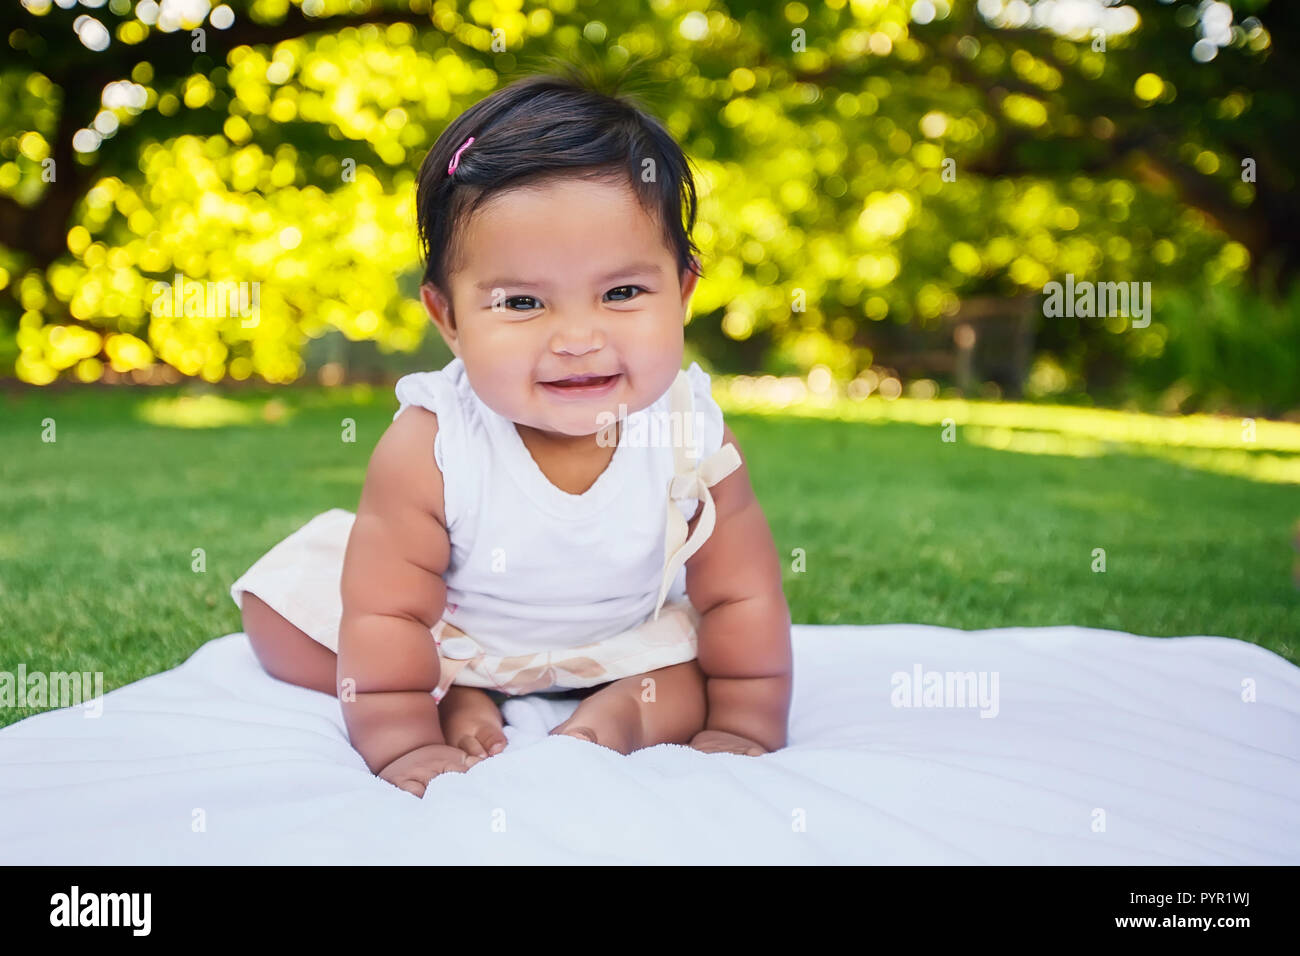 Adorable little baby girl with cute smile sitting unsupported and starting to take first crawling steps, being independent and of Mexican heritage Stock Photo